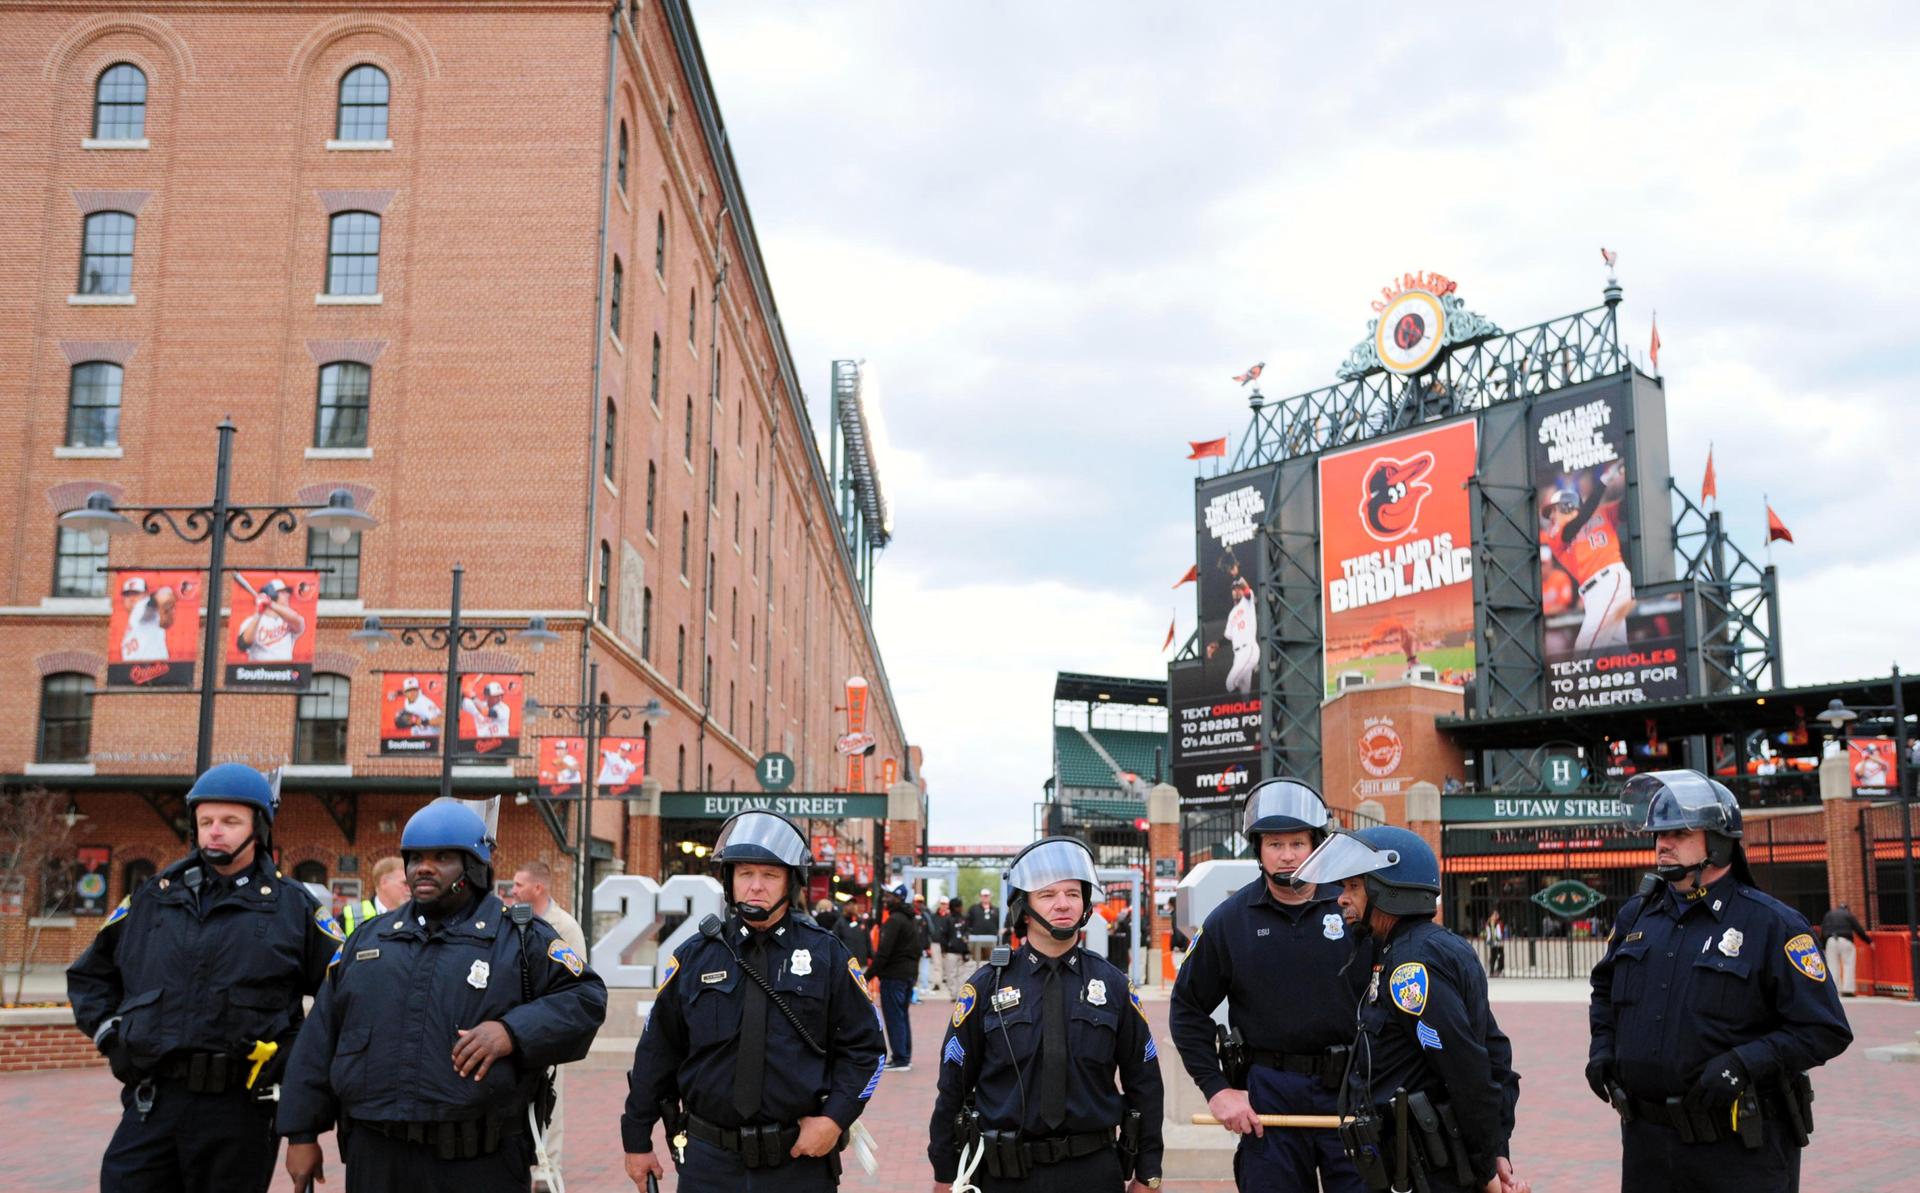 Baltimore police officers stand outside of Oriole Park at Camden Yards prior to the cancellation of a game between the Chicago White Sox and Baltimore Orioles on April 27, 2015.